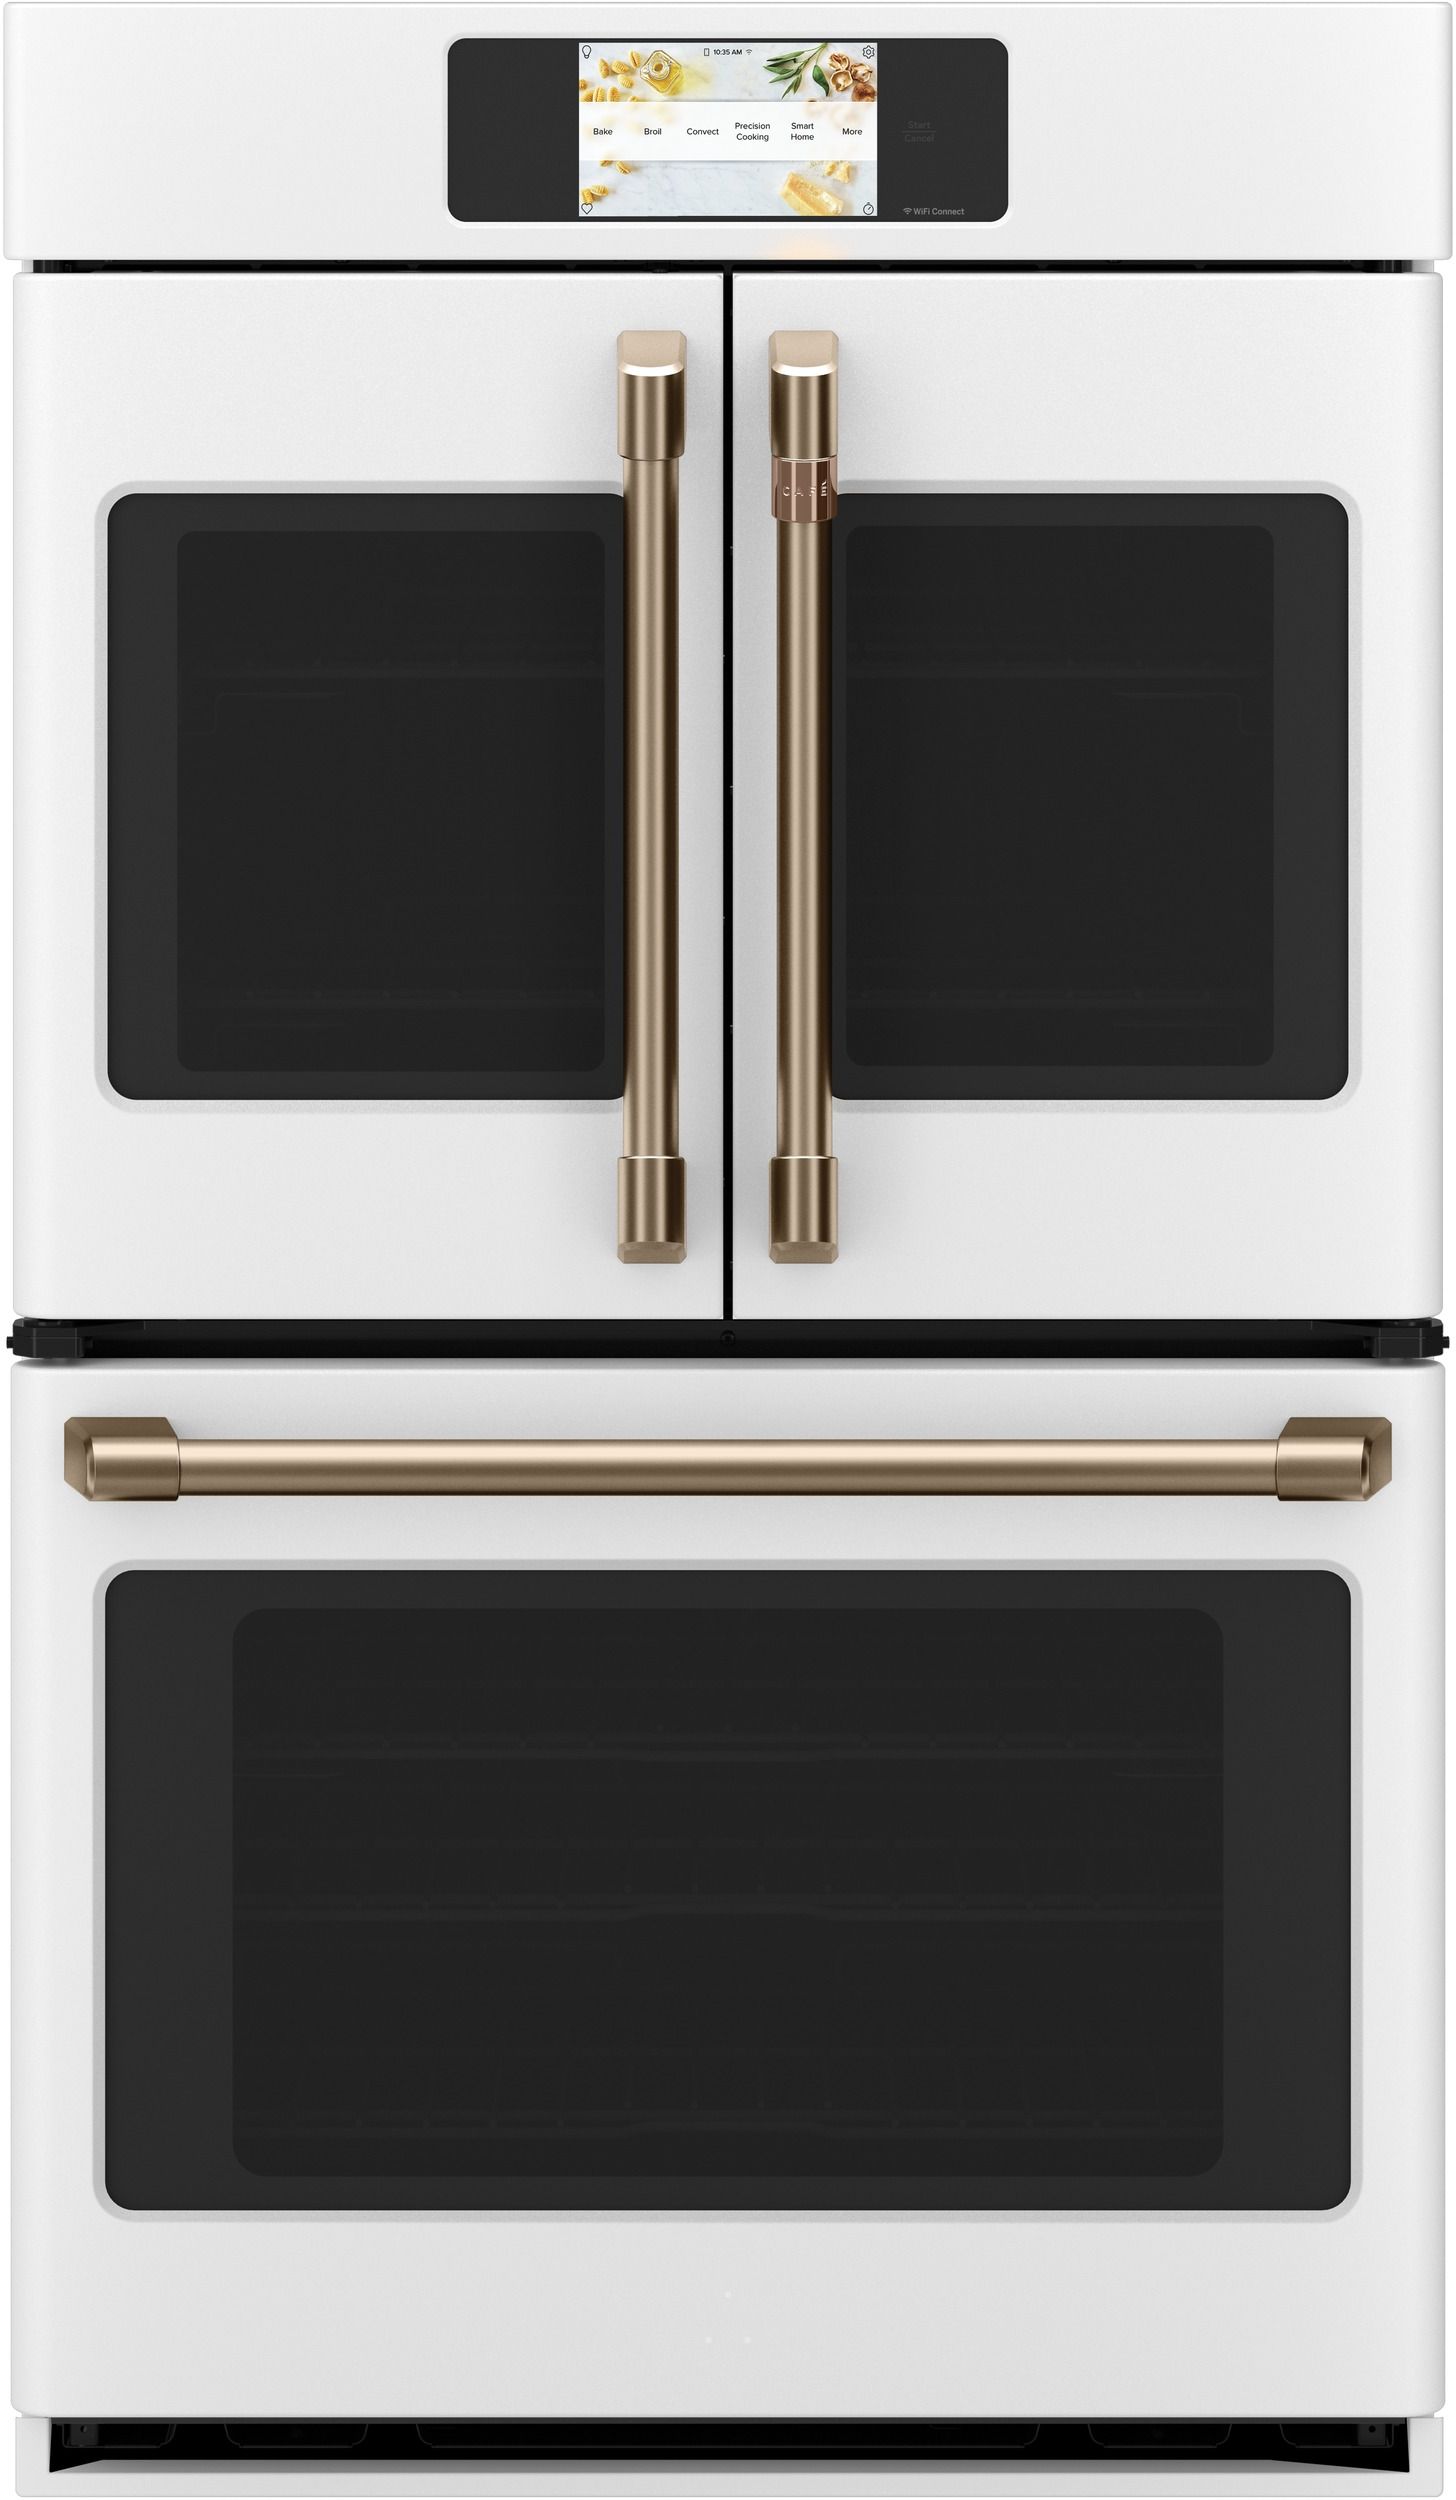 Café™ Professional Series 30" Matte White Smart Built In Convection French Door Double Wall Oven